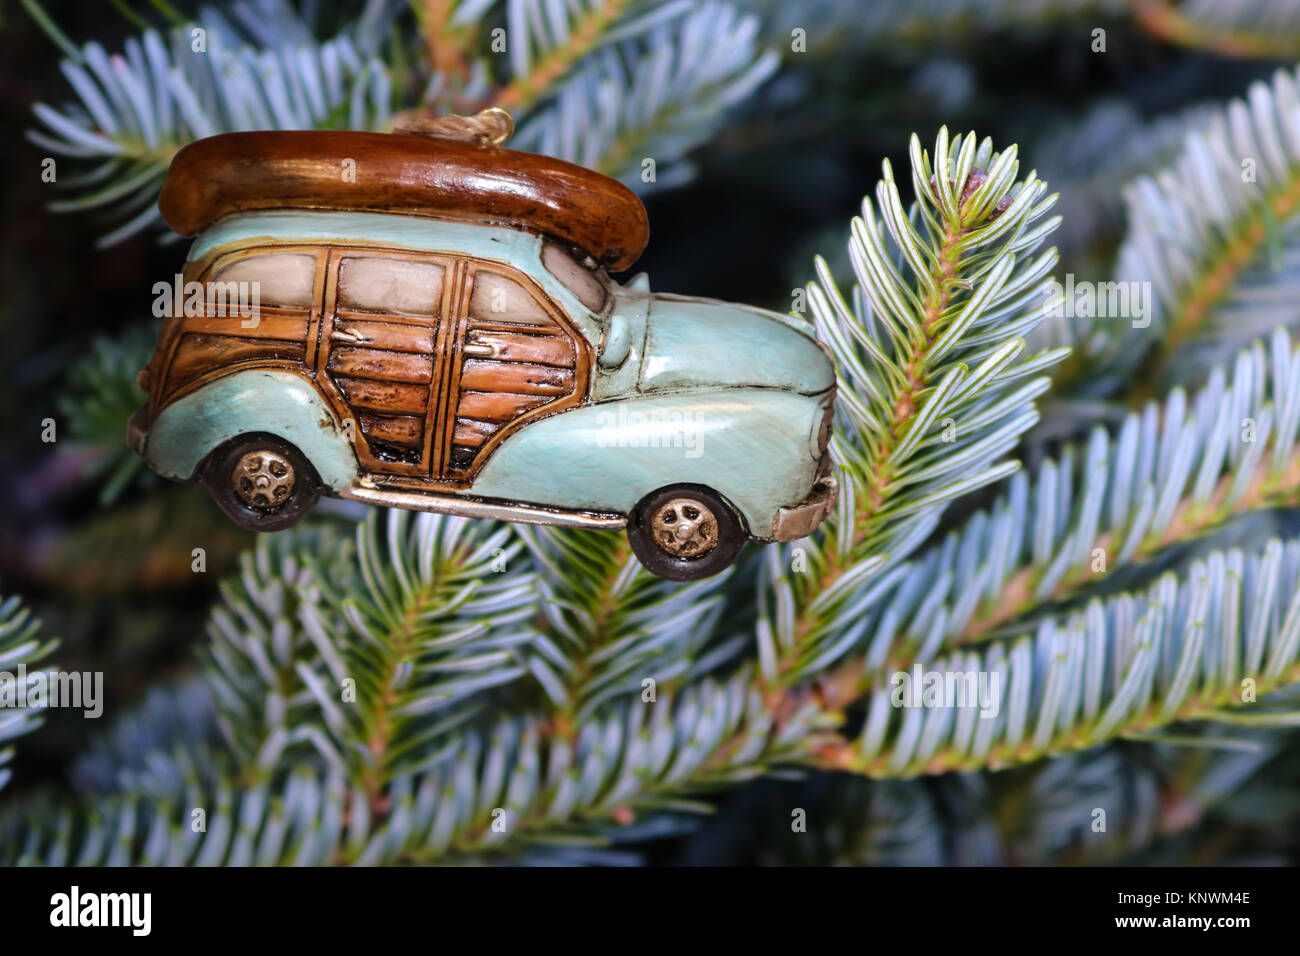 Retro car with canoe on top Christmas Ornament on a silver Christmas tree Stock Photo